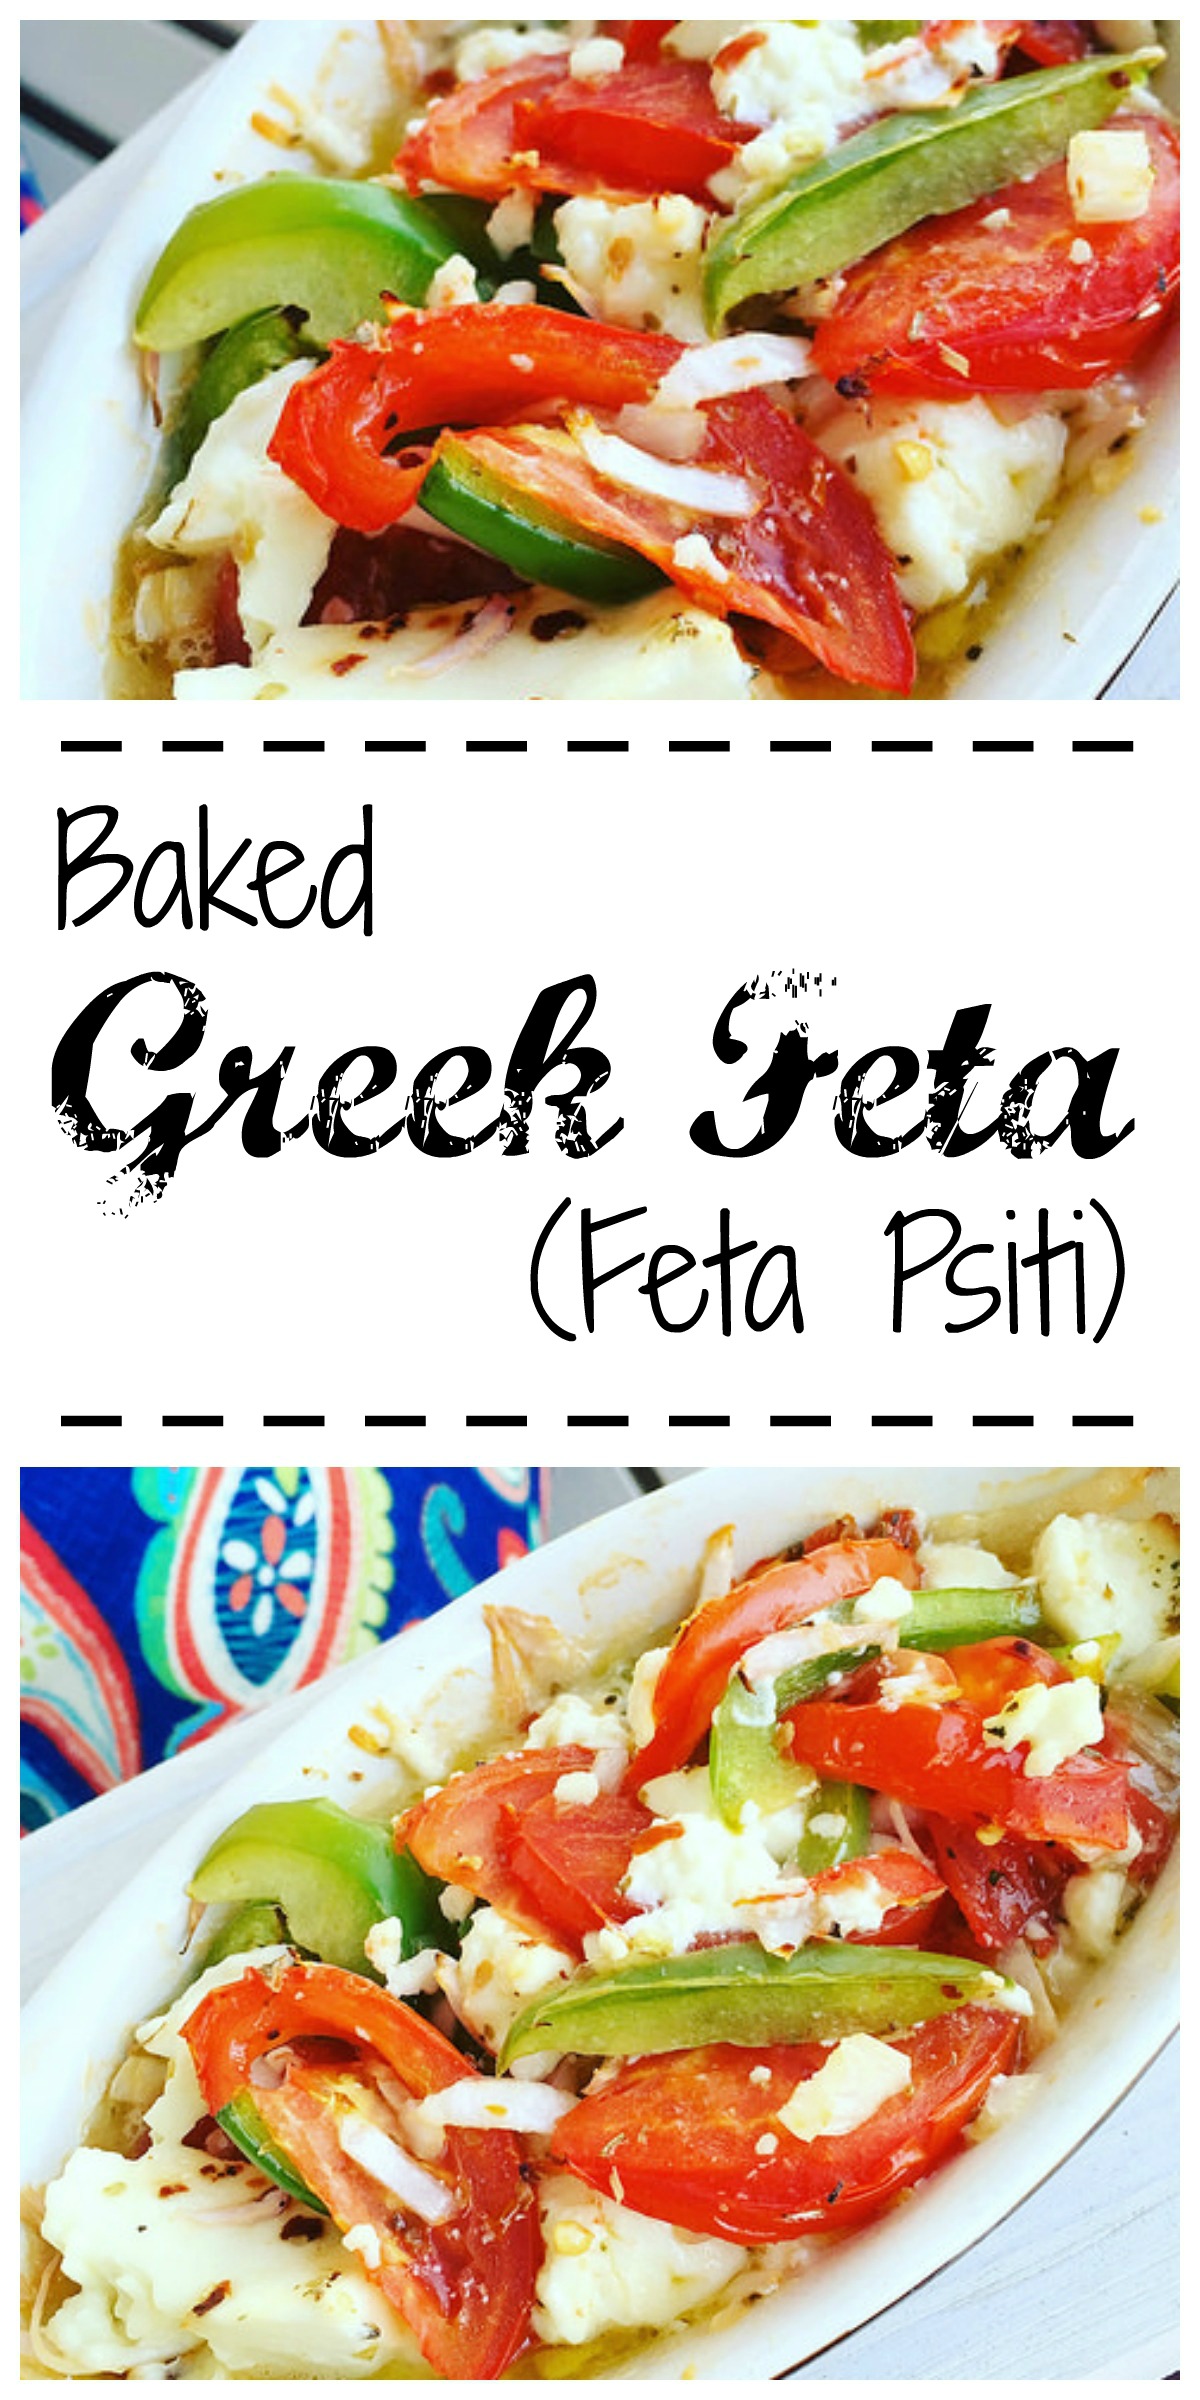 Greek Feta Psiti is easy to prepare and is a perfect appetizer or meze. You don't even have to stir it - just pile on a few simple ingredients!